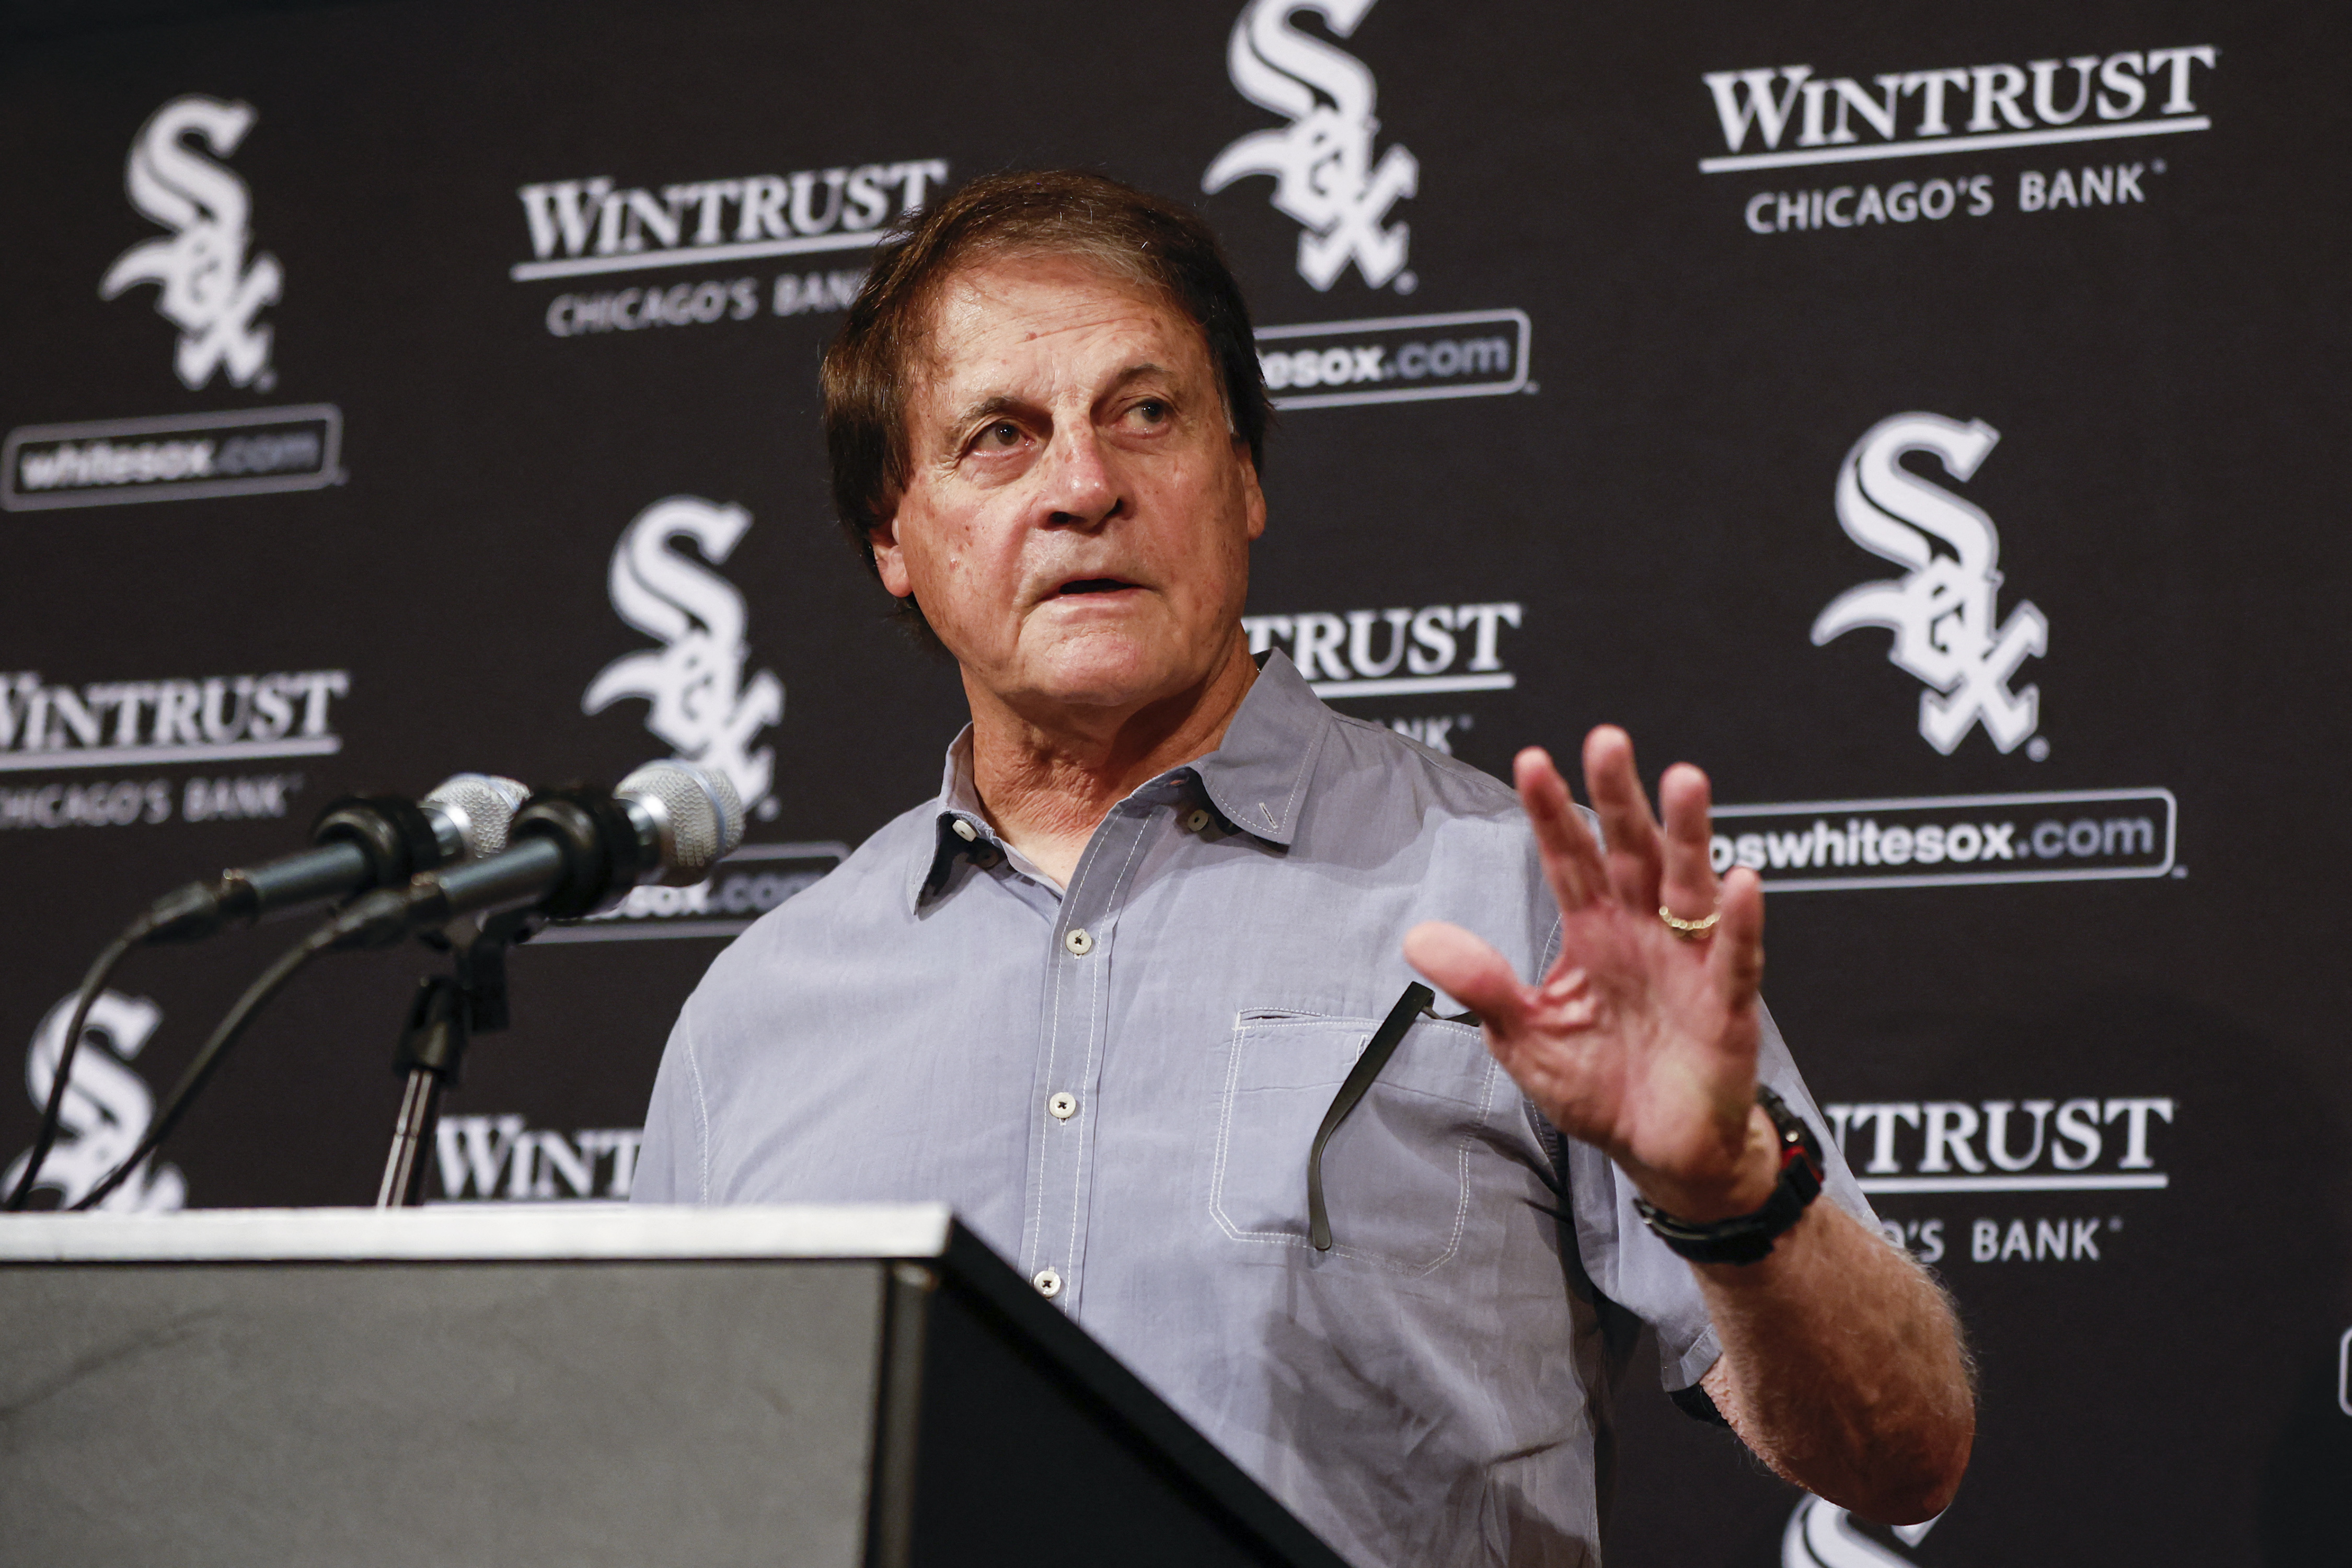 MLB roundup: La Russa moves into second place on career wins list